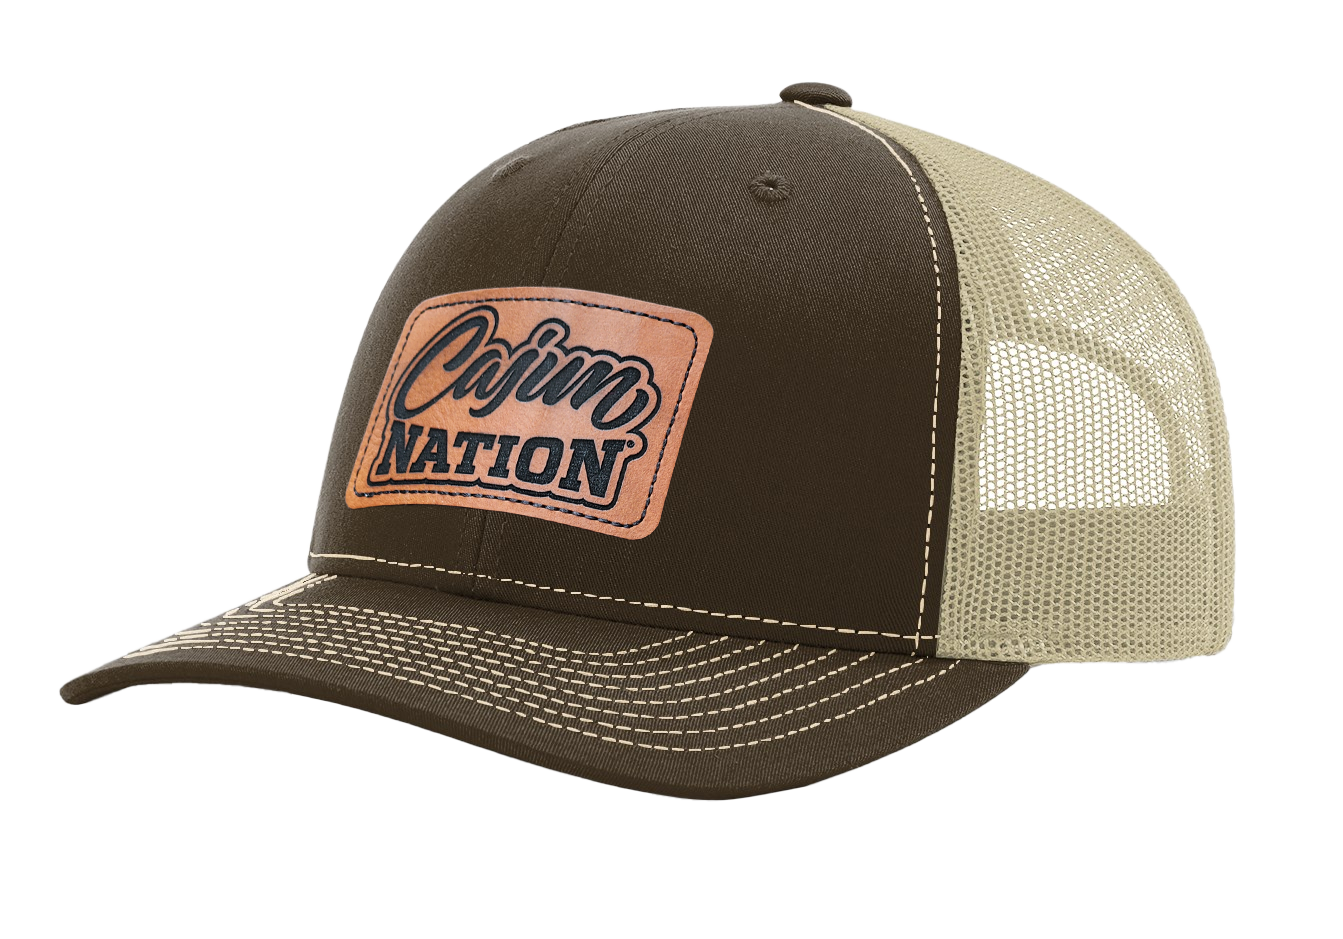 Brown Snap Back with the Leather Cajun Nation Patch